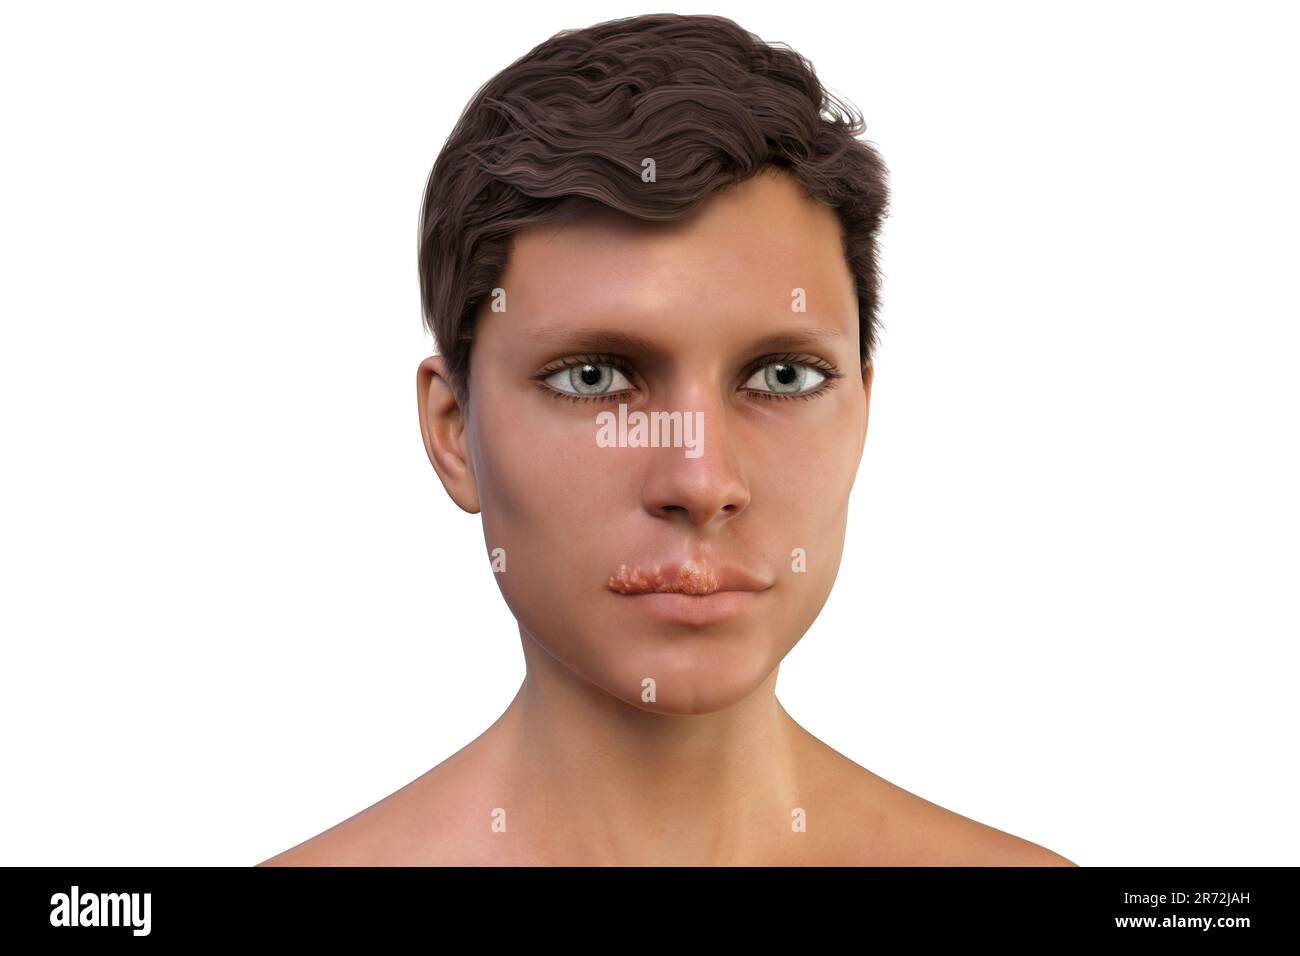 Cold sore on the lip of a man, computer illustration. Cold sores are painful, fluid-filled blisters caused by infection with the herpes simplex virus. Stock Photo